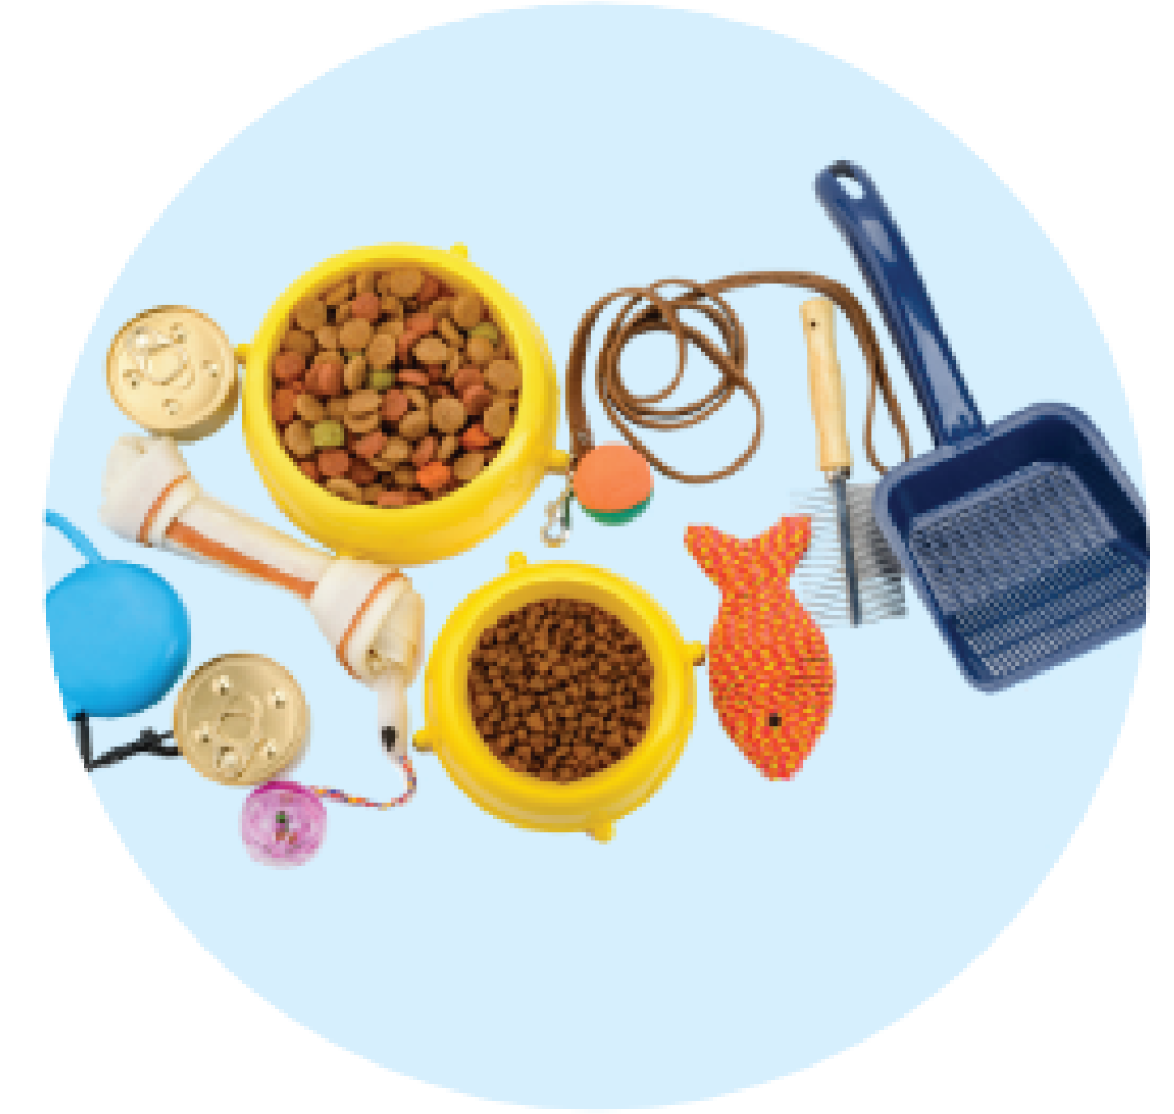 A wide variety of tested pet products